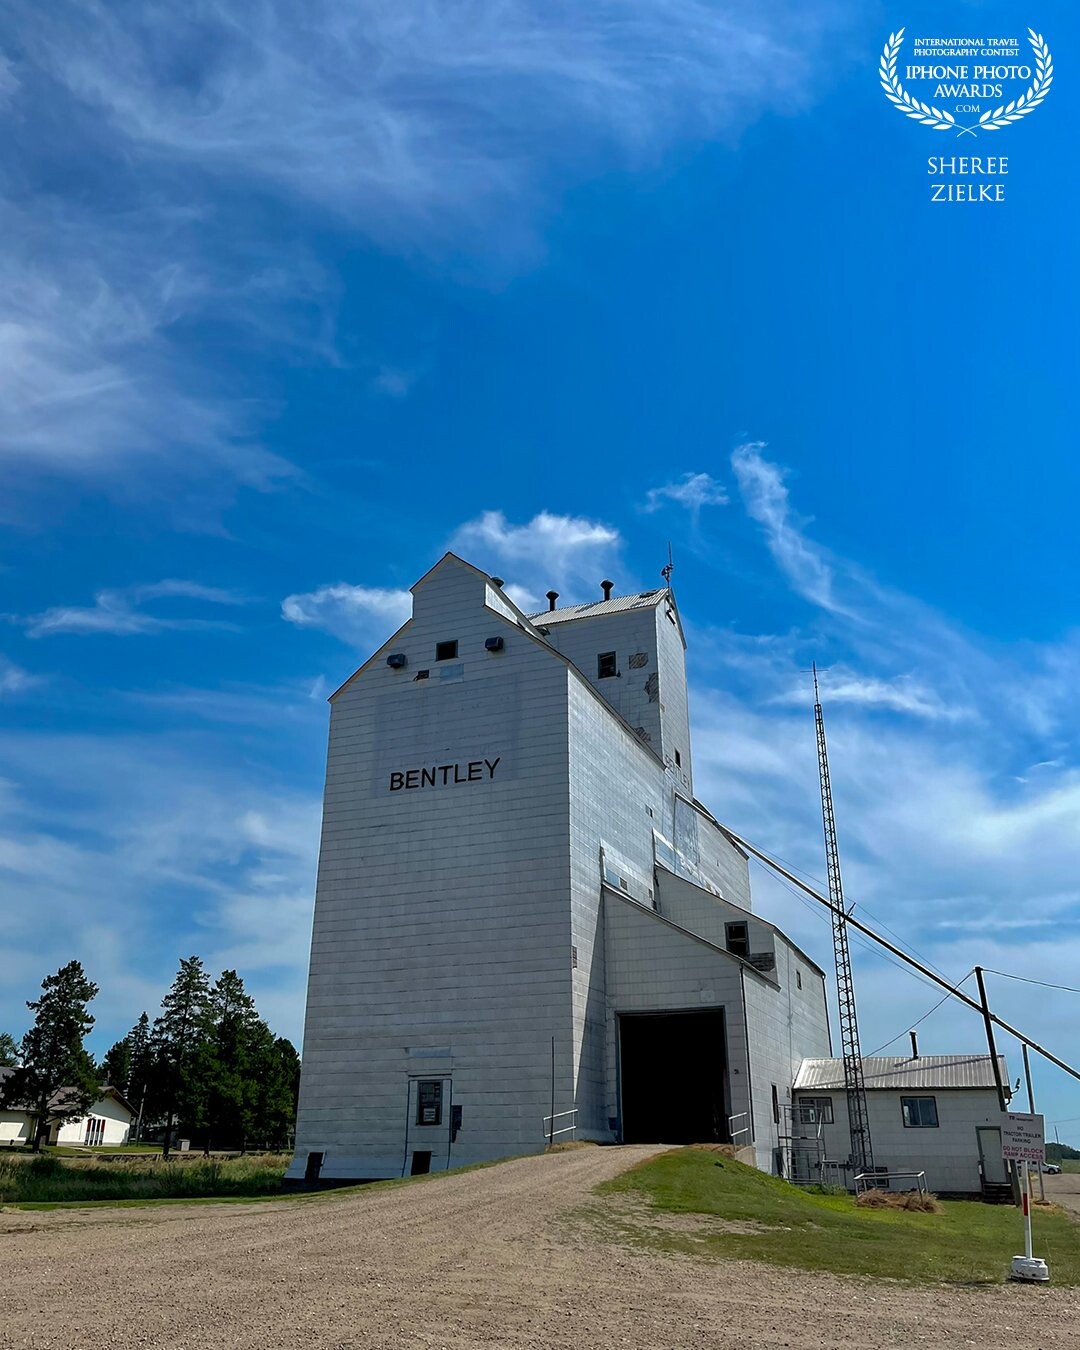 I call these Canadian grain elevators (a disappearing architectural form) the grand dames of the prairies. A cerulean blue sky is the perfect backdrop for these majestic beauties. I am saddened each time one is torn down.